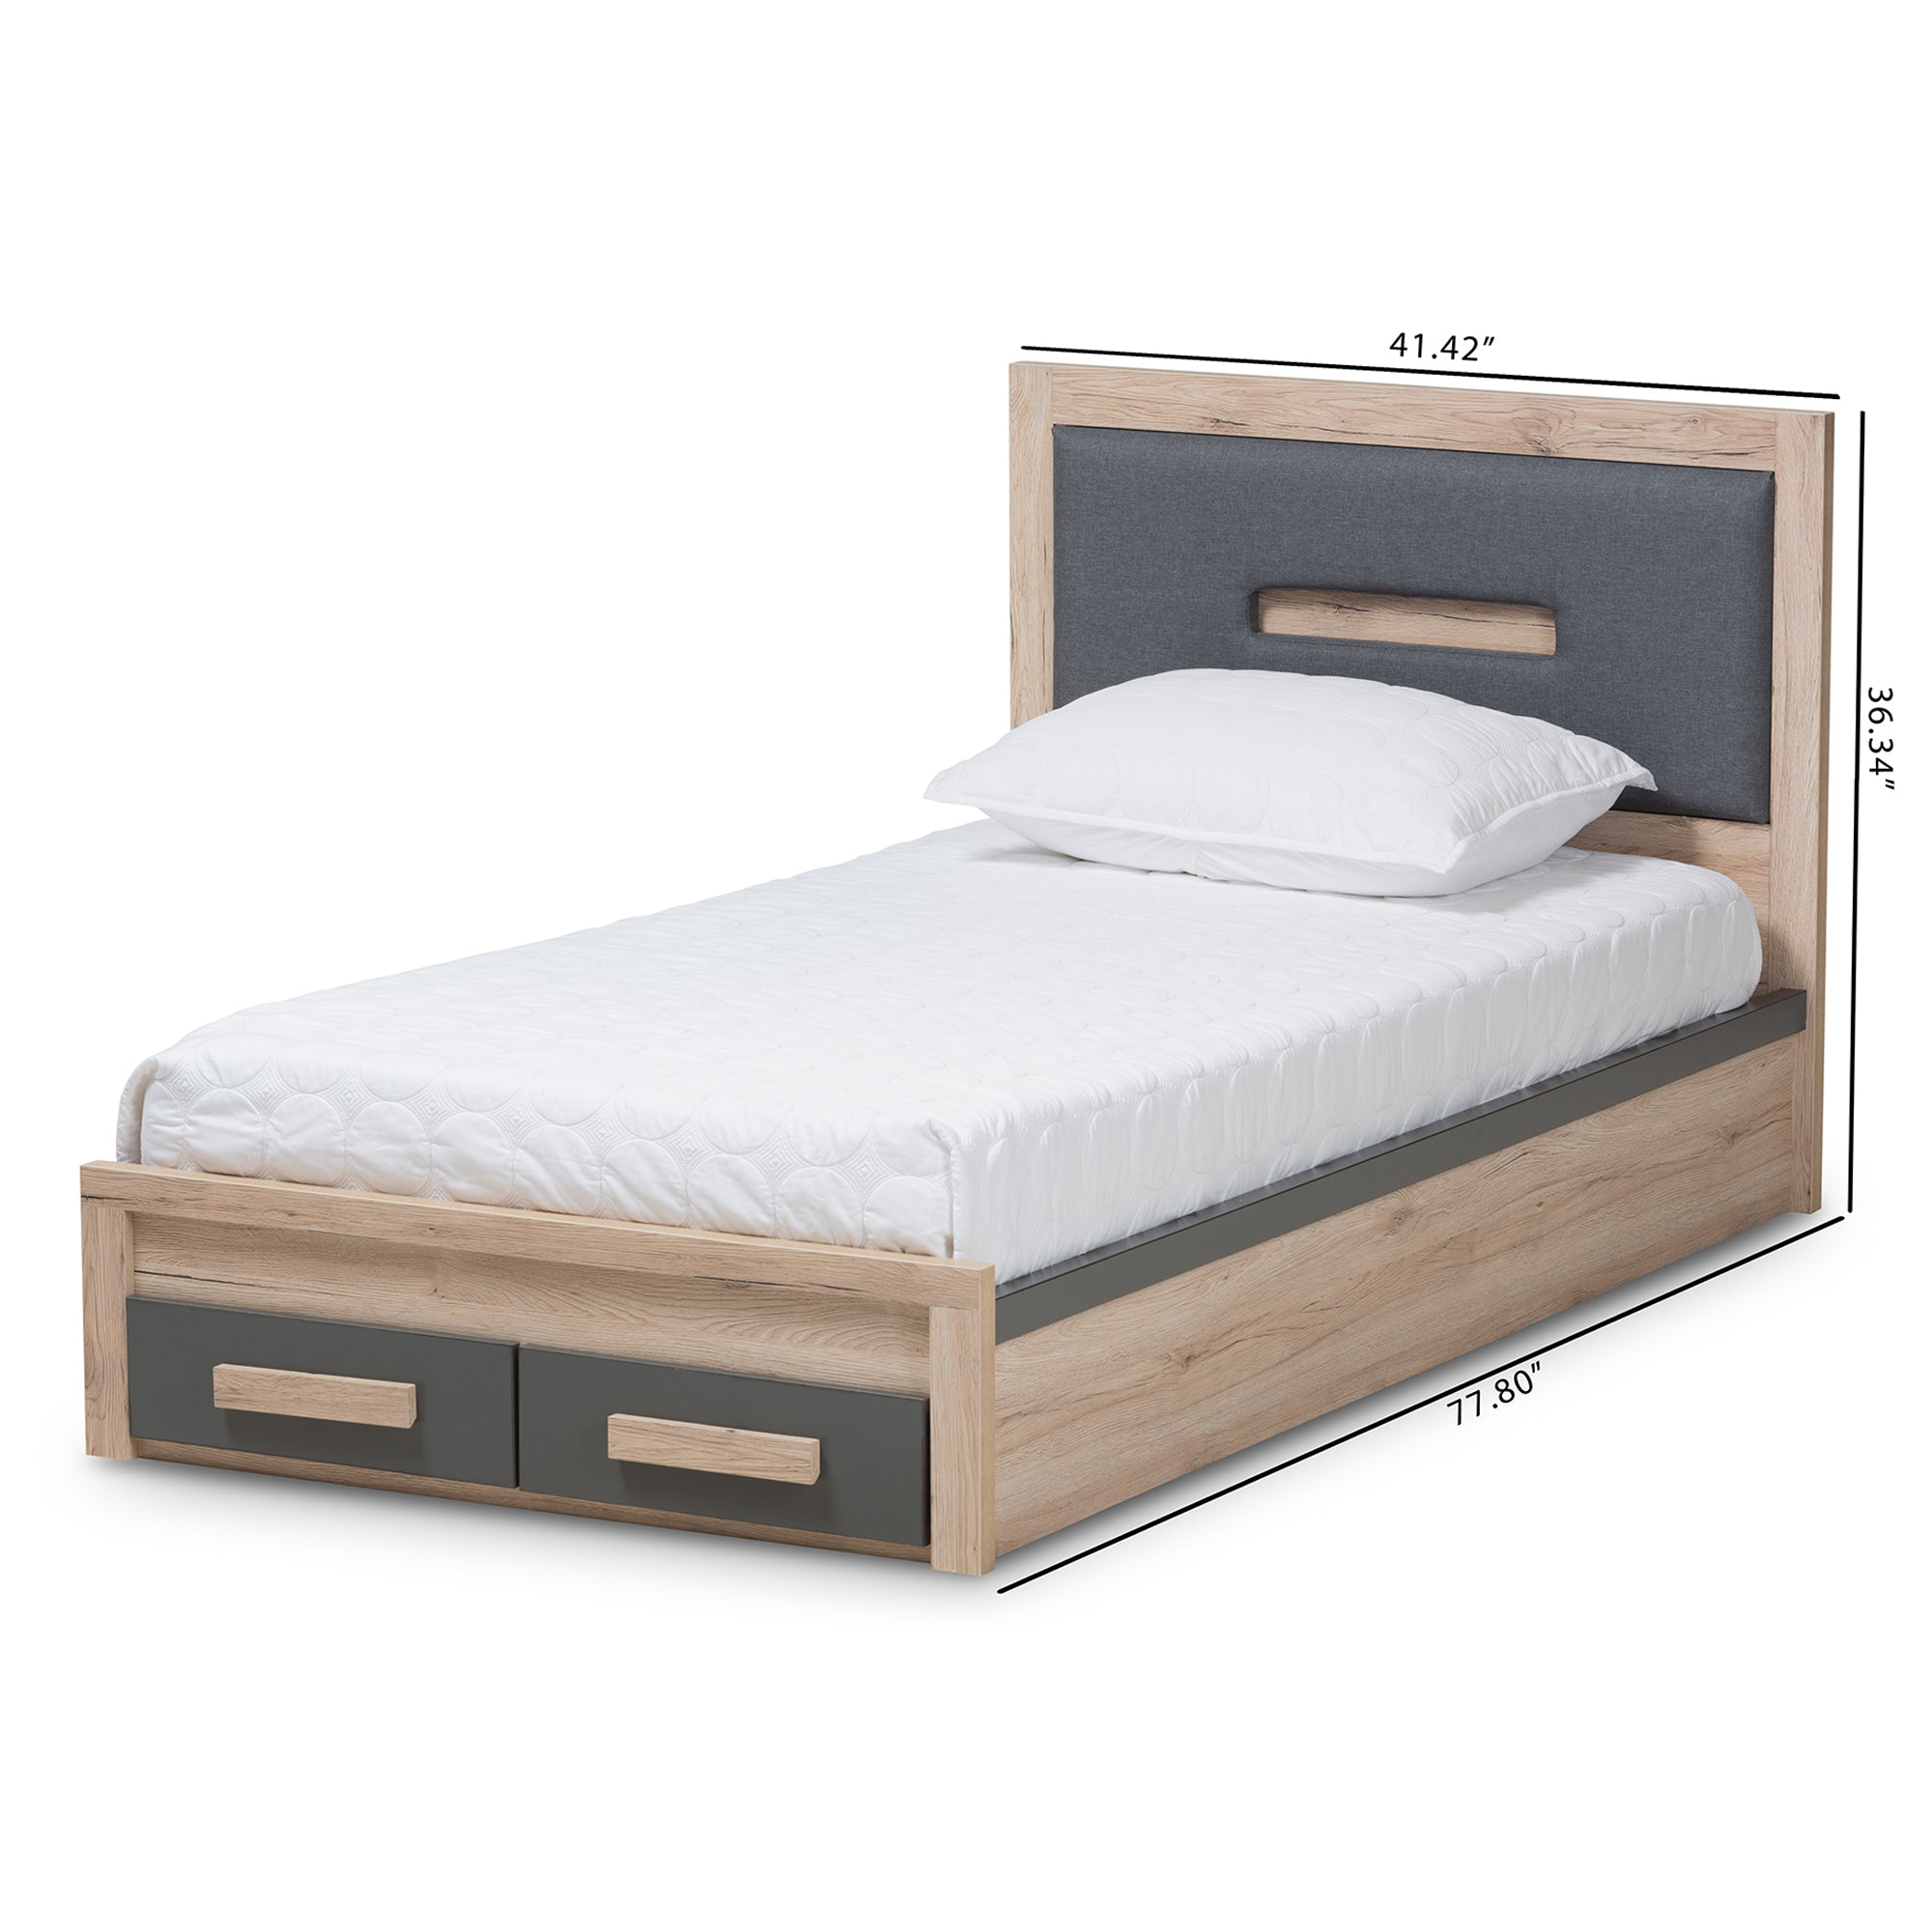 Pandora Contemporary Bed Two-Tone 2-Drawer-Bed-Baxton Studio - WI-Wall2Wall Furnishings